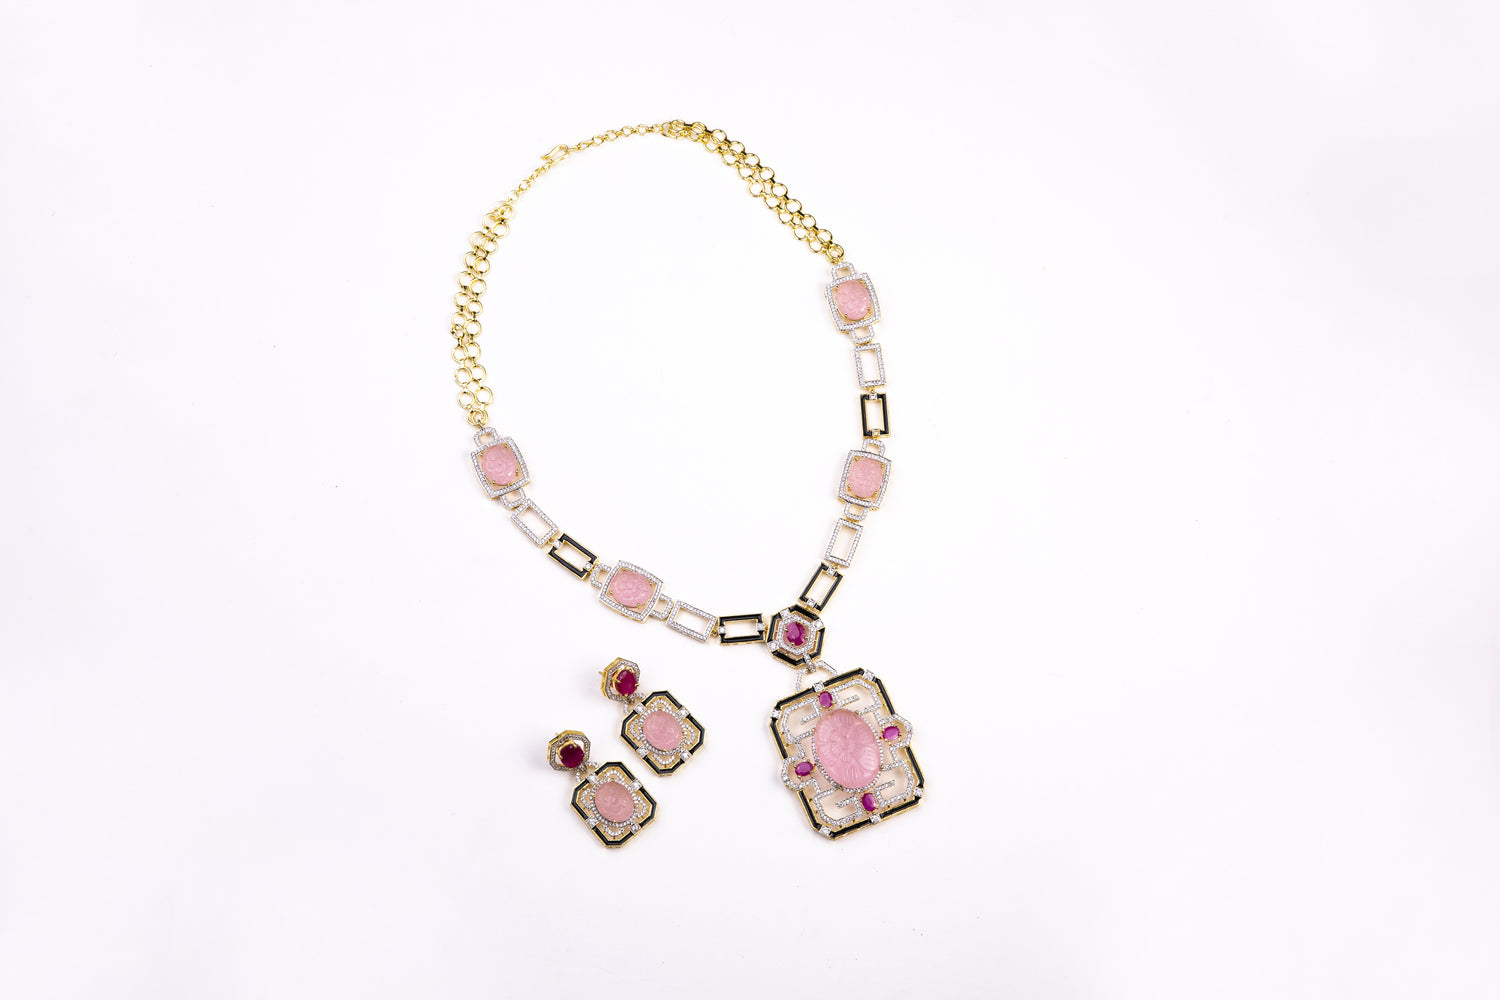 "Fashionable Necklace Set: Add elegance to your look with this beautiful pink stone and Swarovski necklace set.